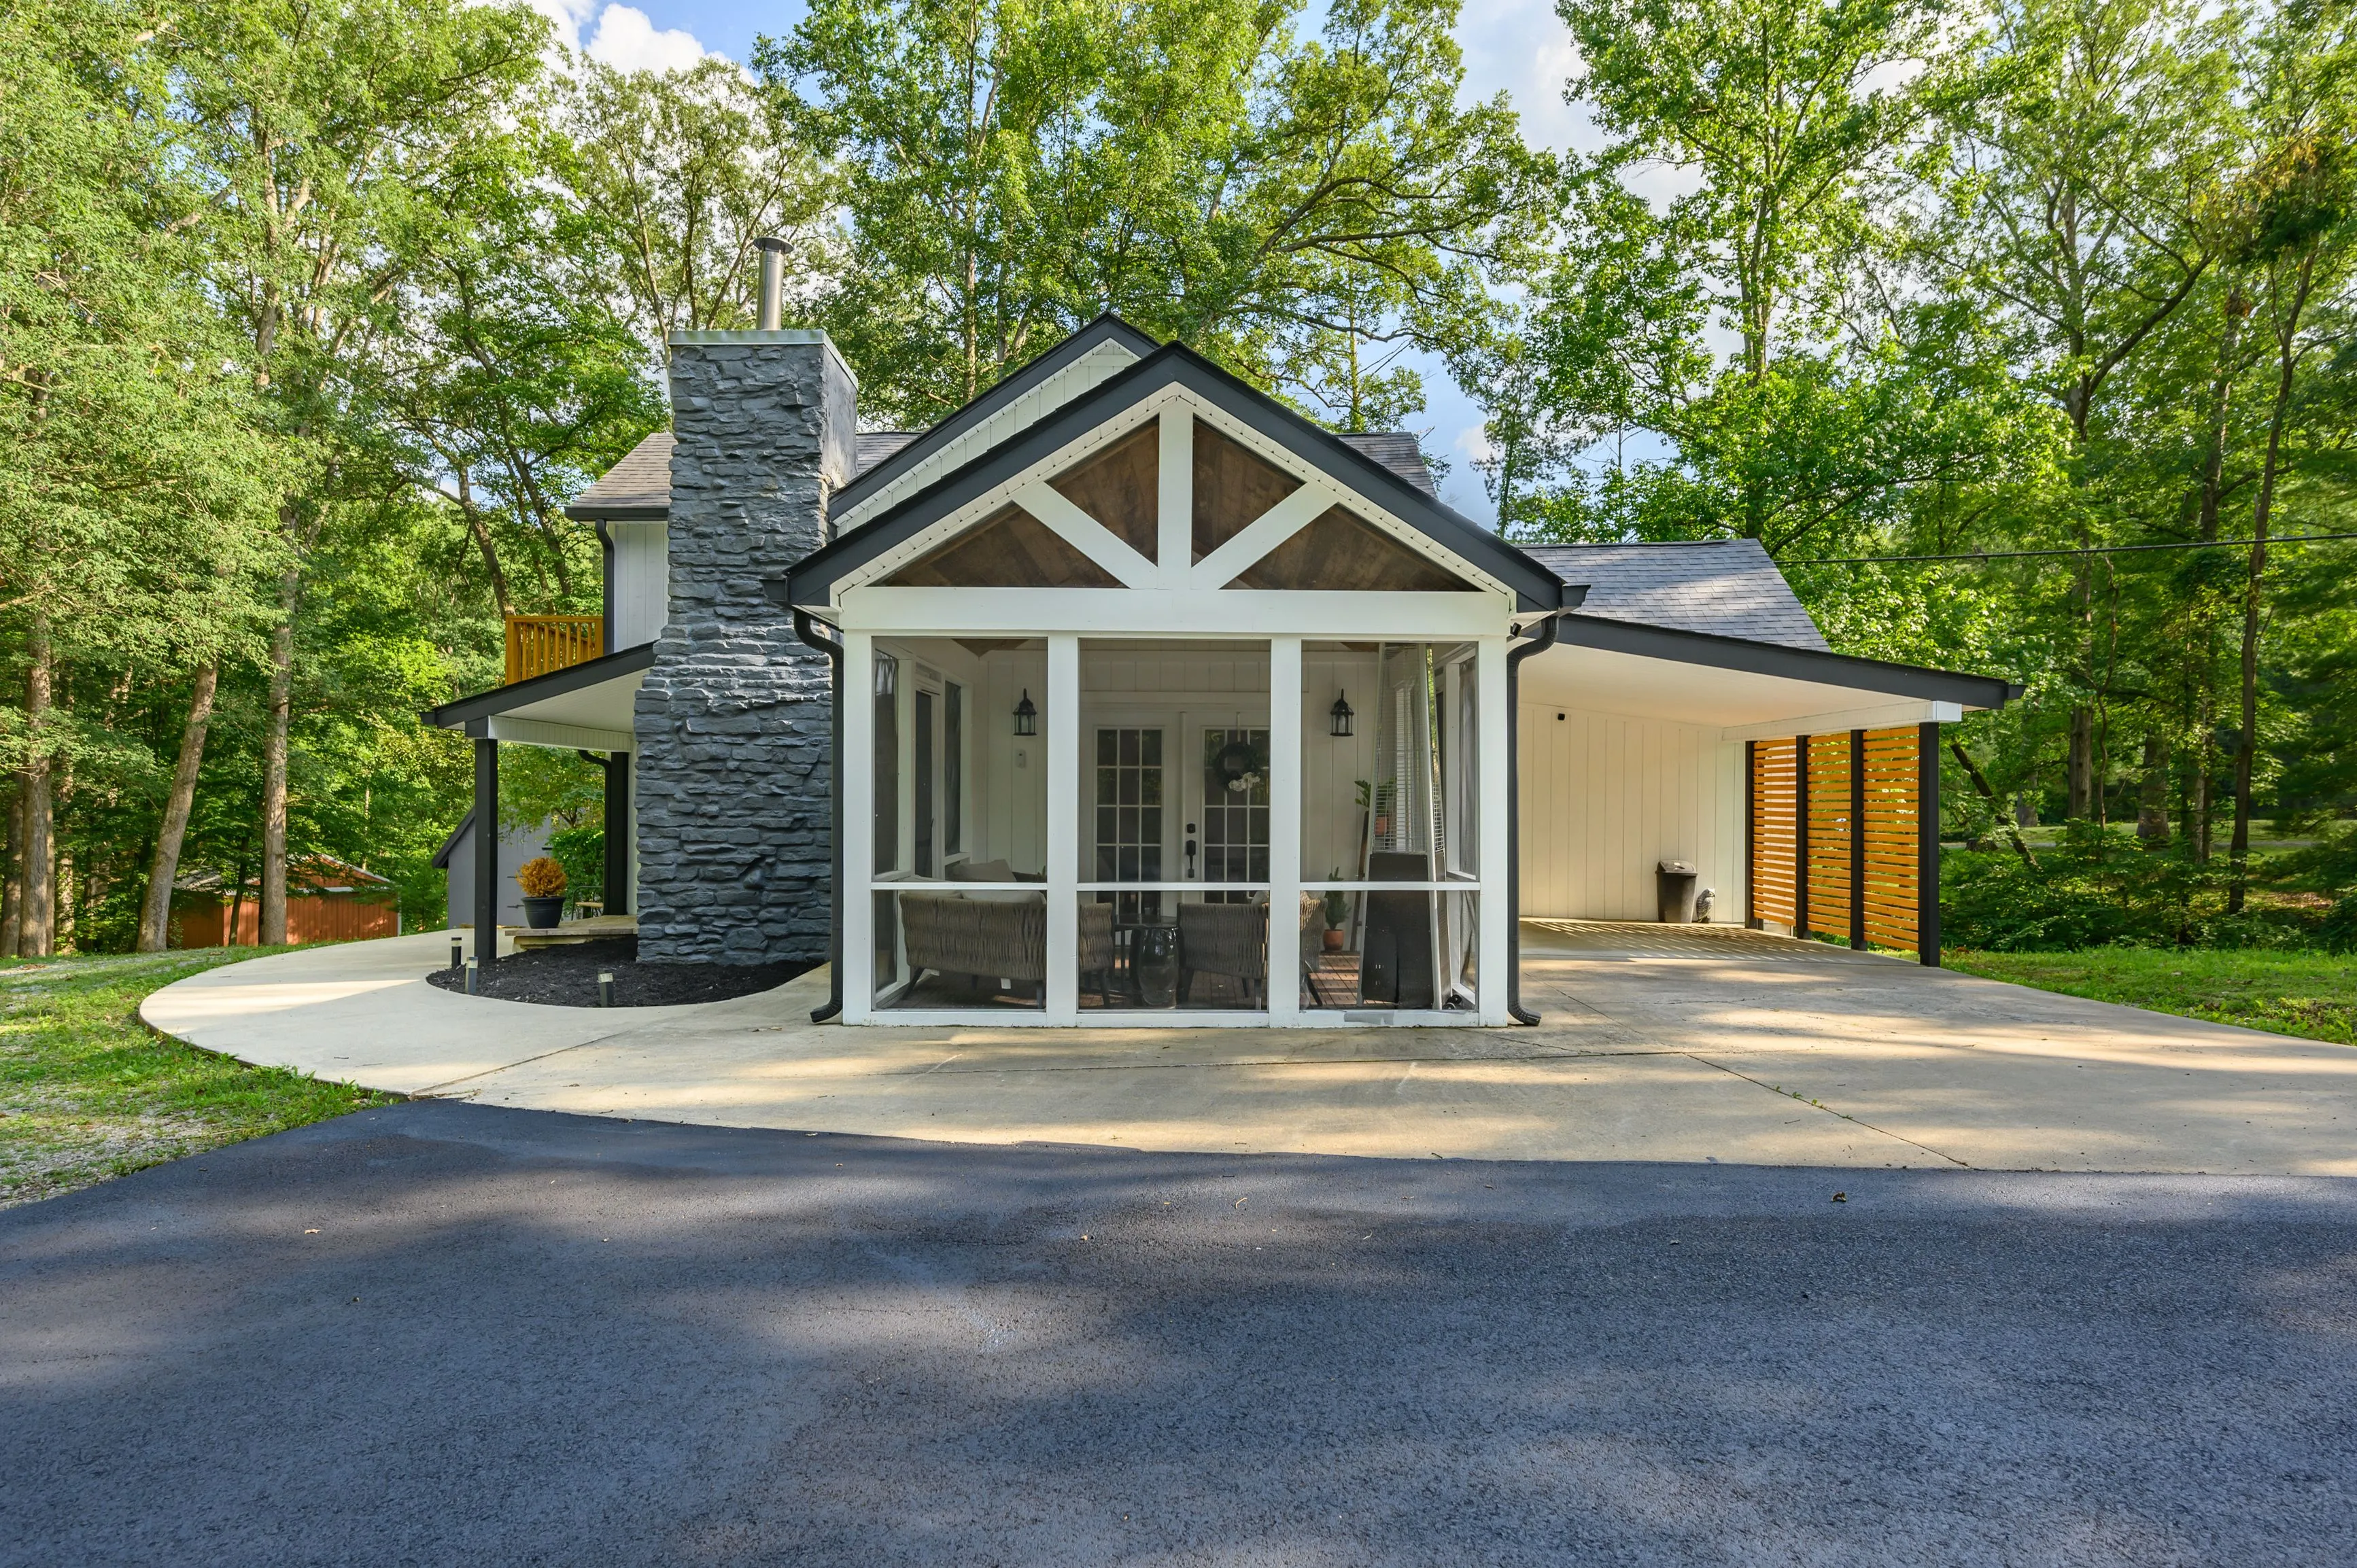 Modern single-family house with gable roof, stone chimney, and a paved driveway surrounded by trees.